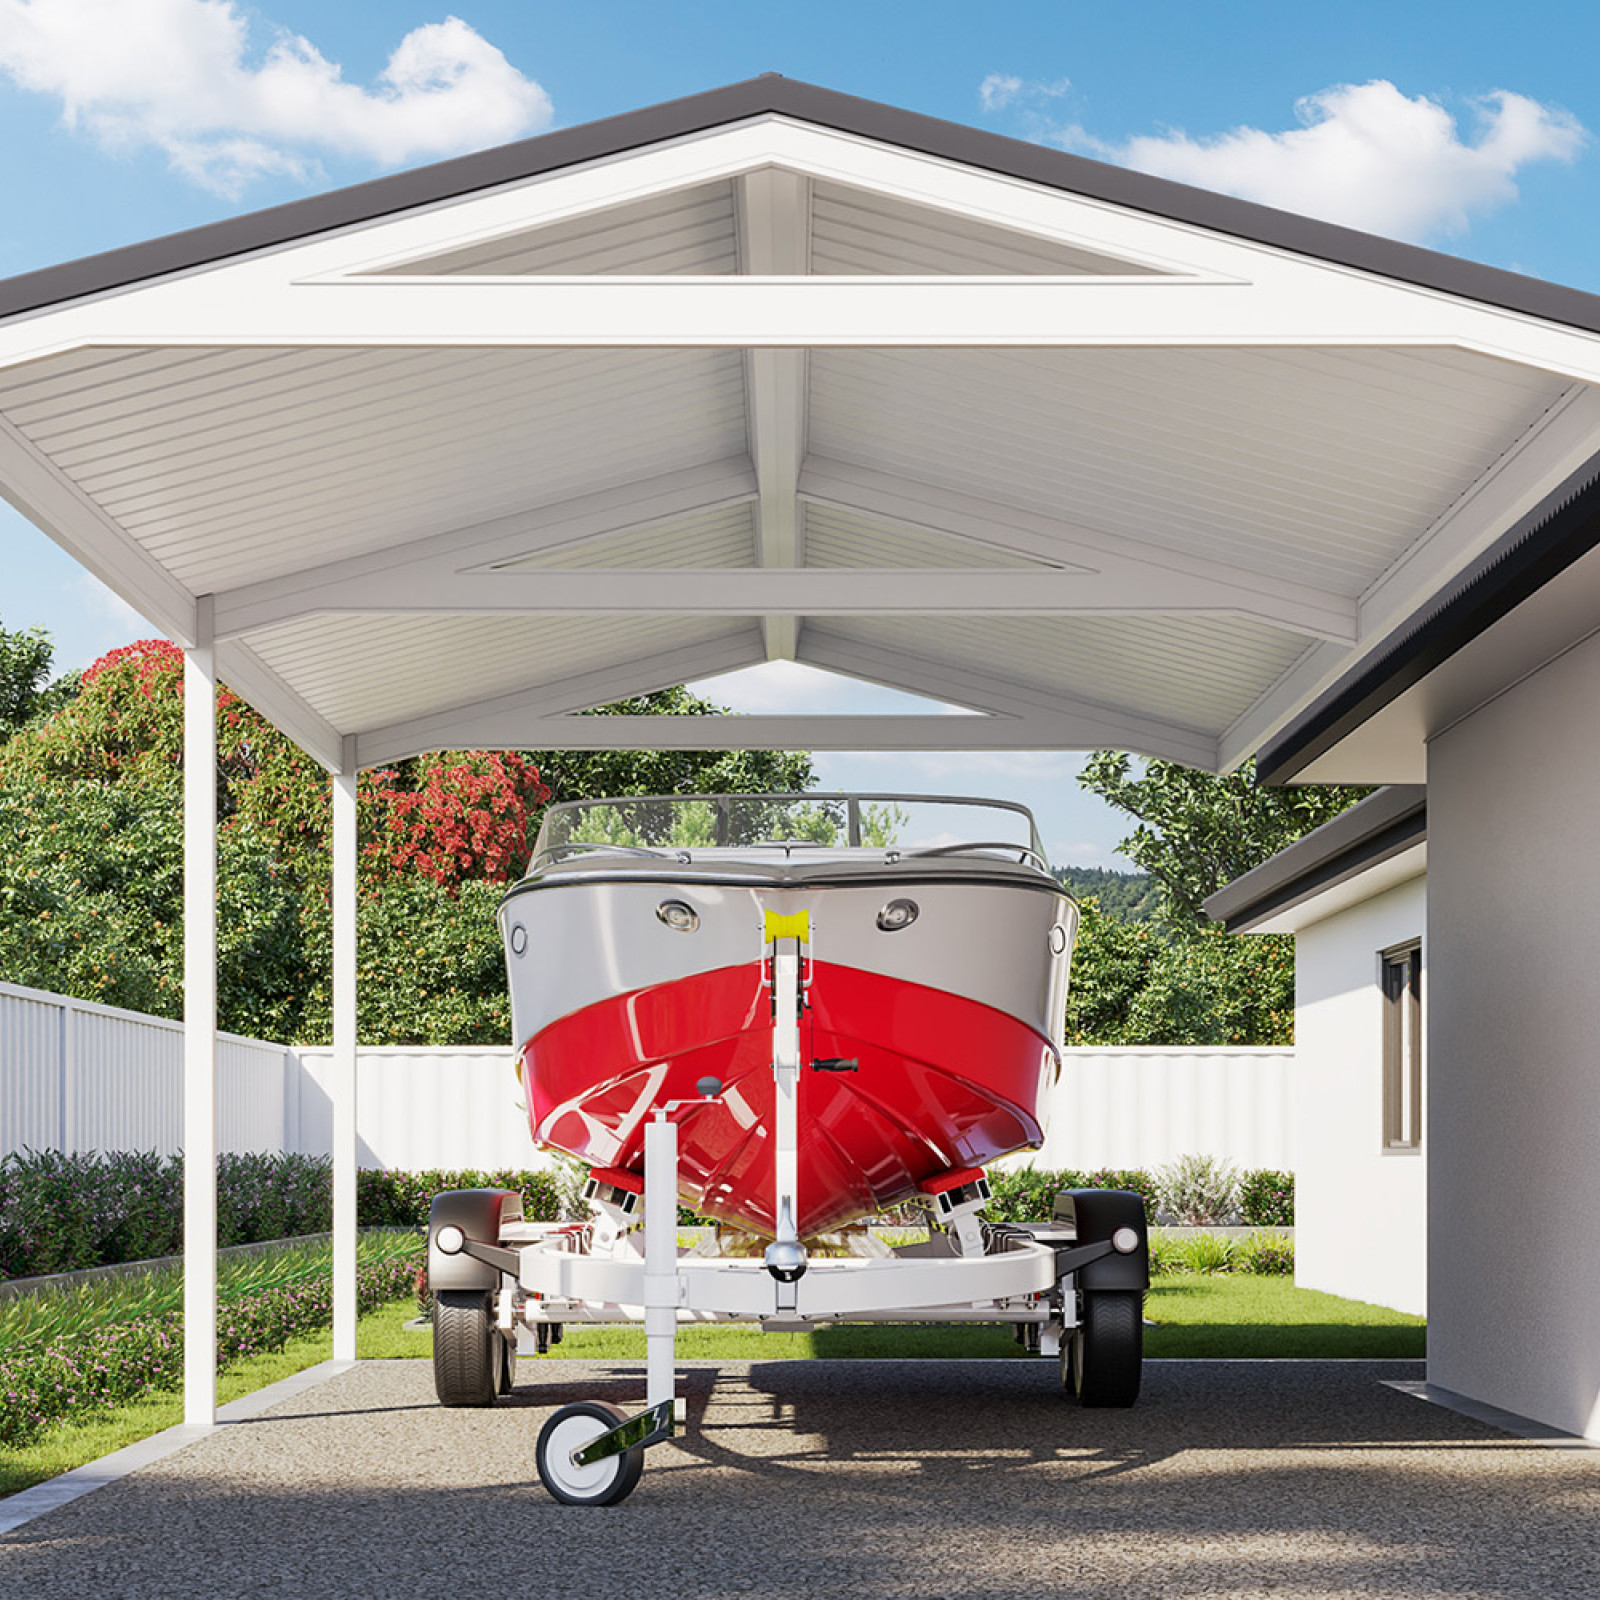 Gable roof carport with a red boat parked beneath